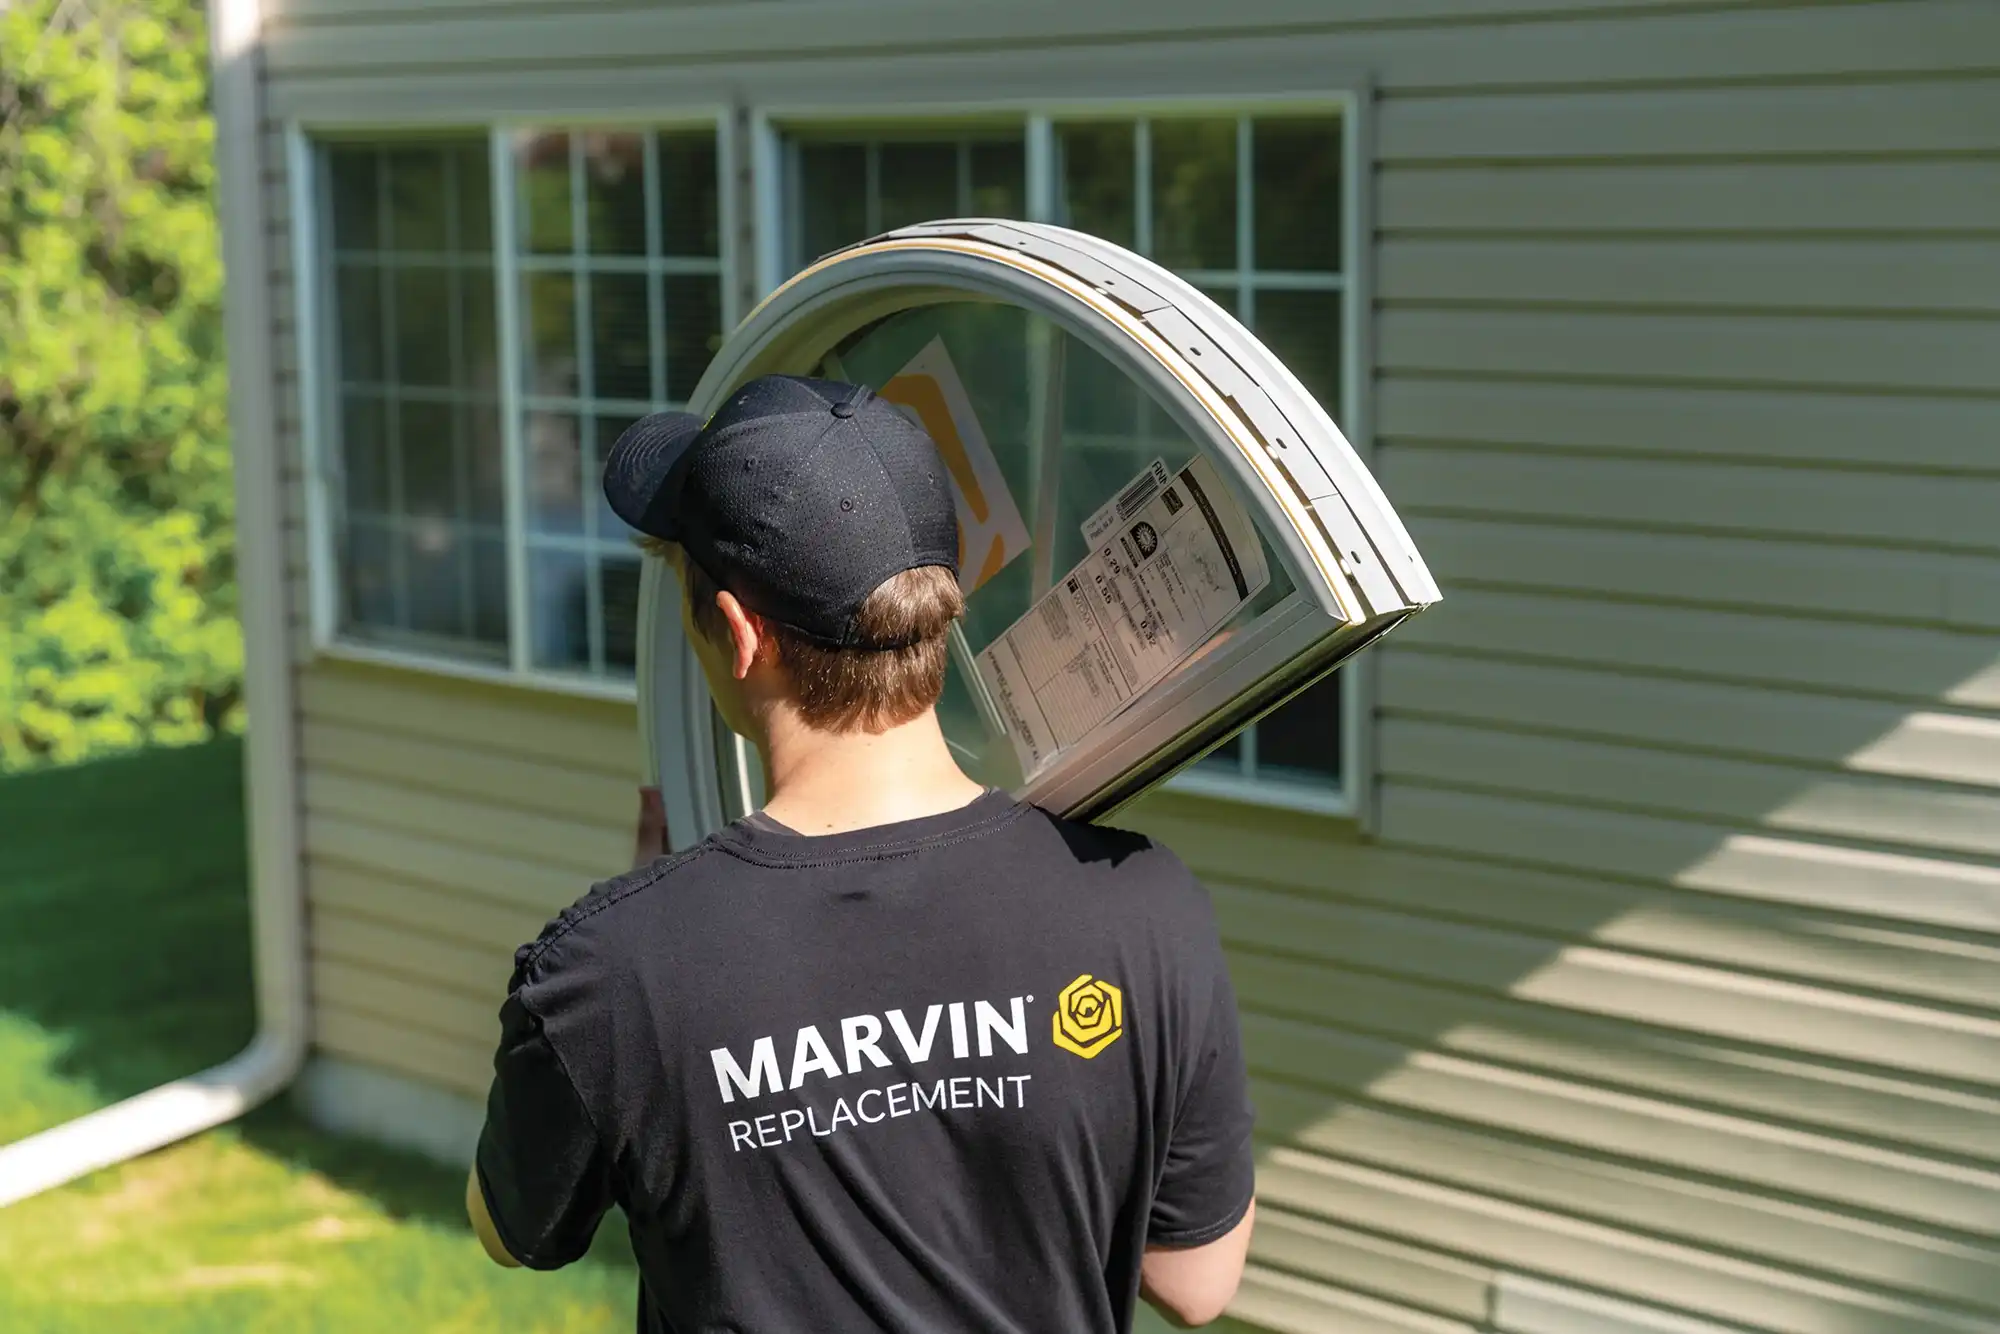 Marvin Replacement window installer carries a Round Top window.